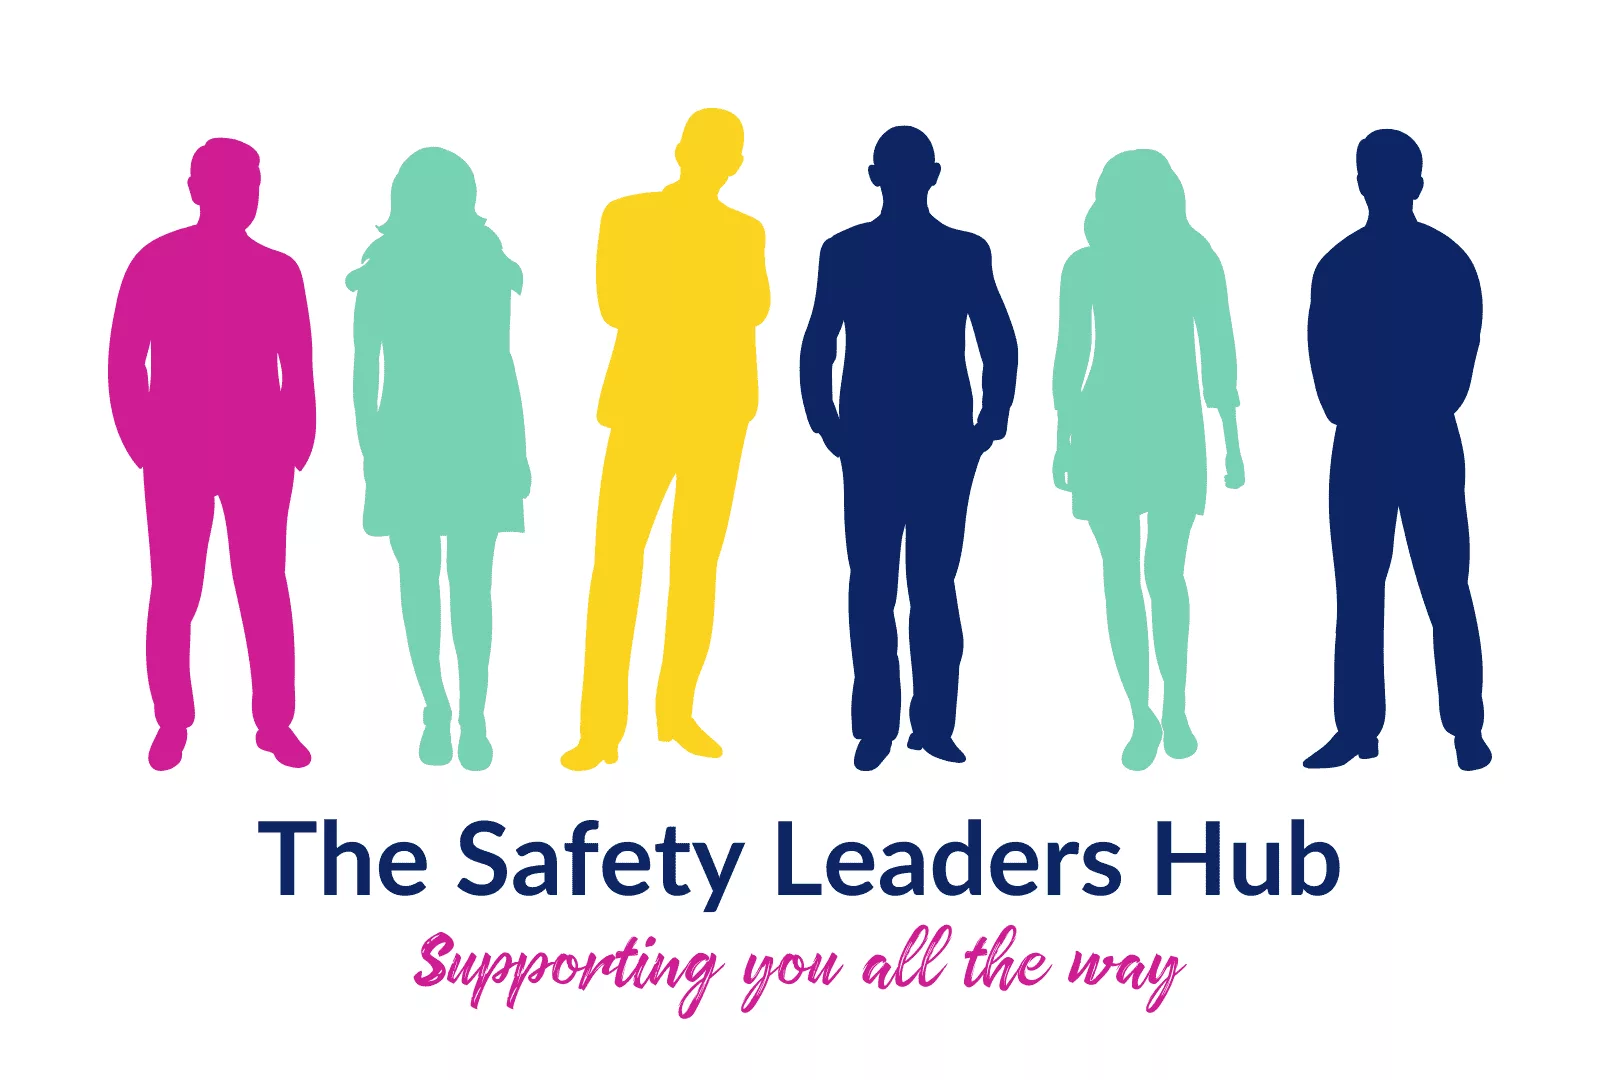 The Safety Leaders Hub